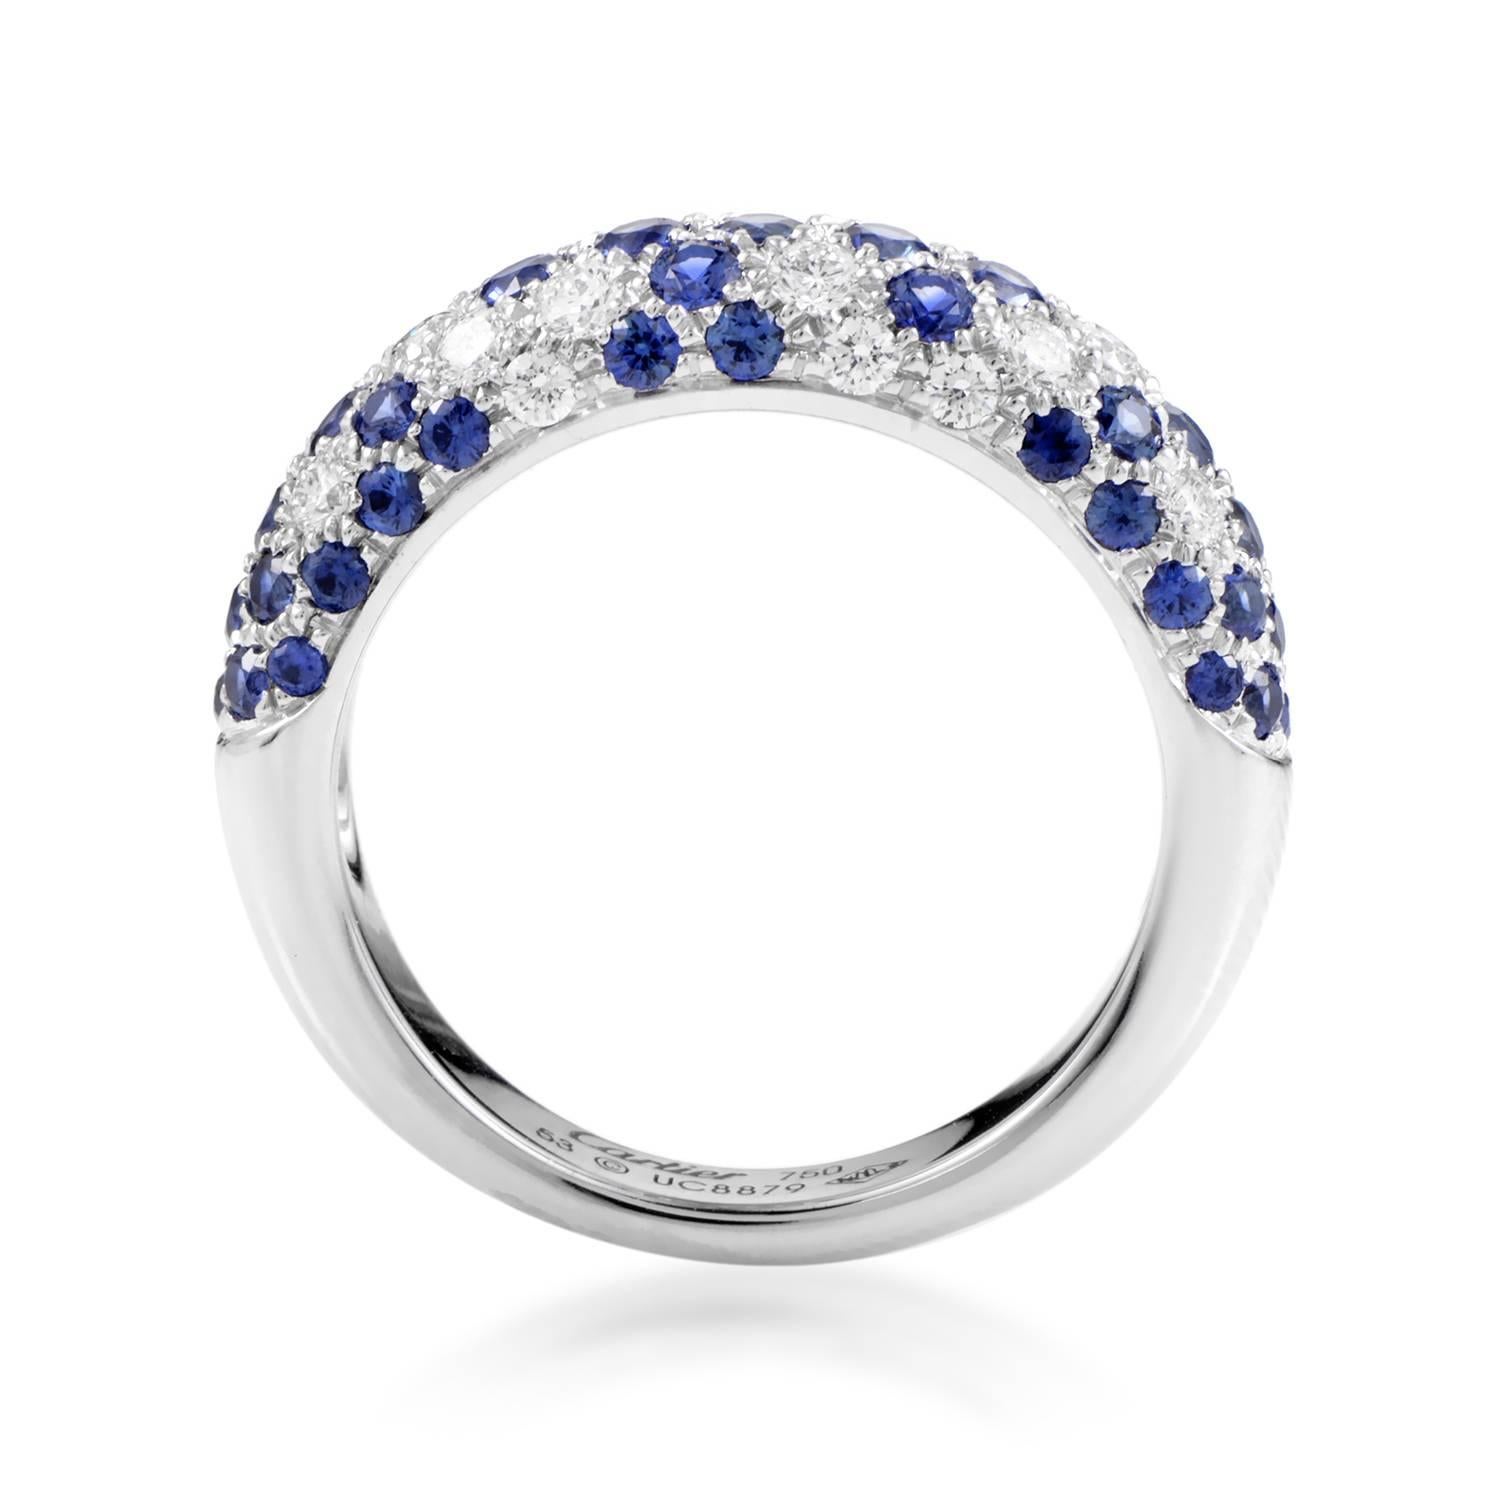 Scattered along a gloriously glistening sea of diamonds weighing in total 0.60ct, magnificent sapphires totaling 1.00 carat lend their pleasant color to this splendid 18K white gold band from Cartier.
Ring Size: 6.75(53)
Band Thickness: 3 mm
Ring